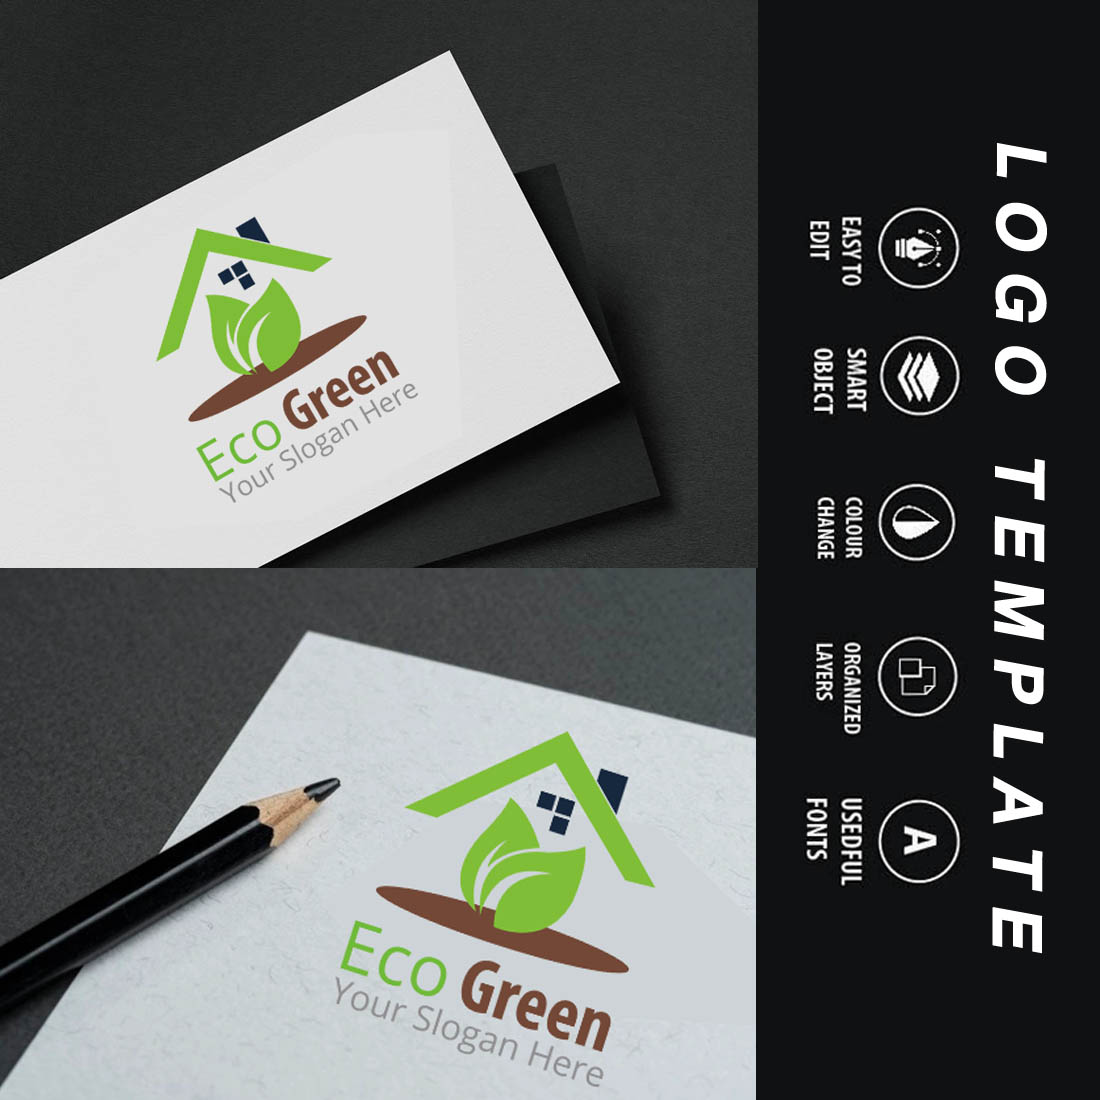 Green Logos in eco style.